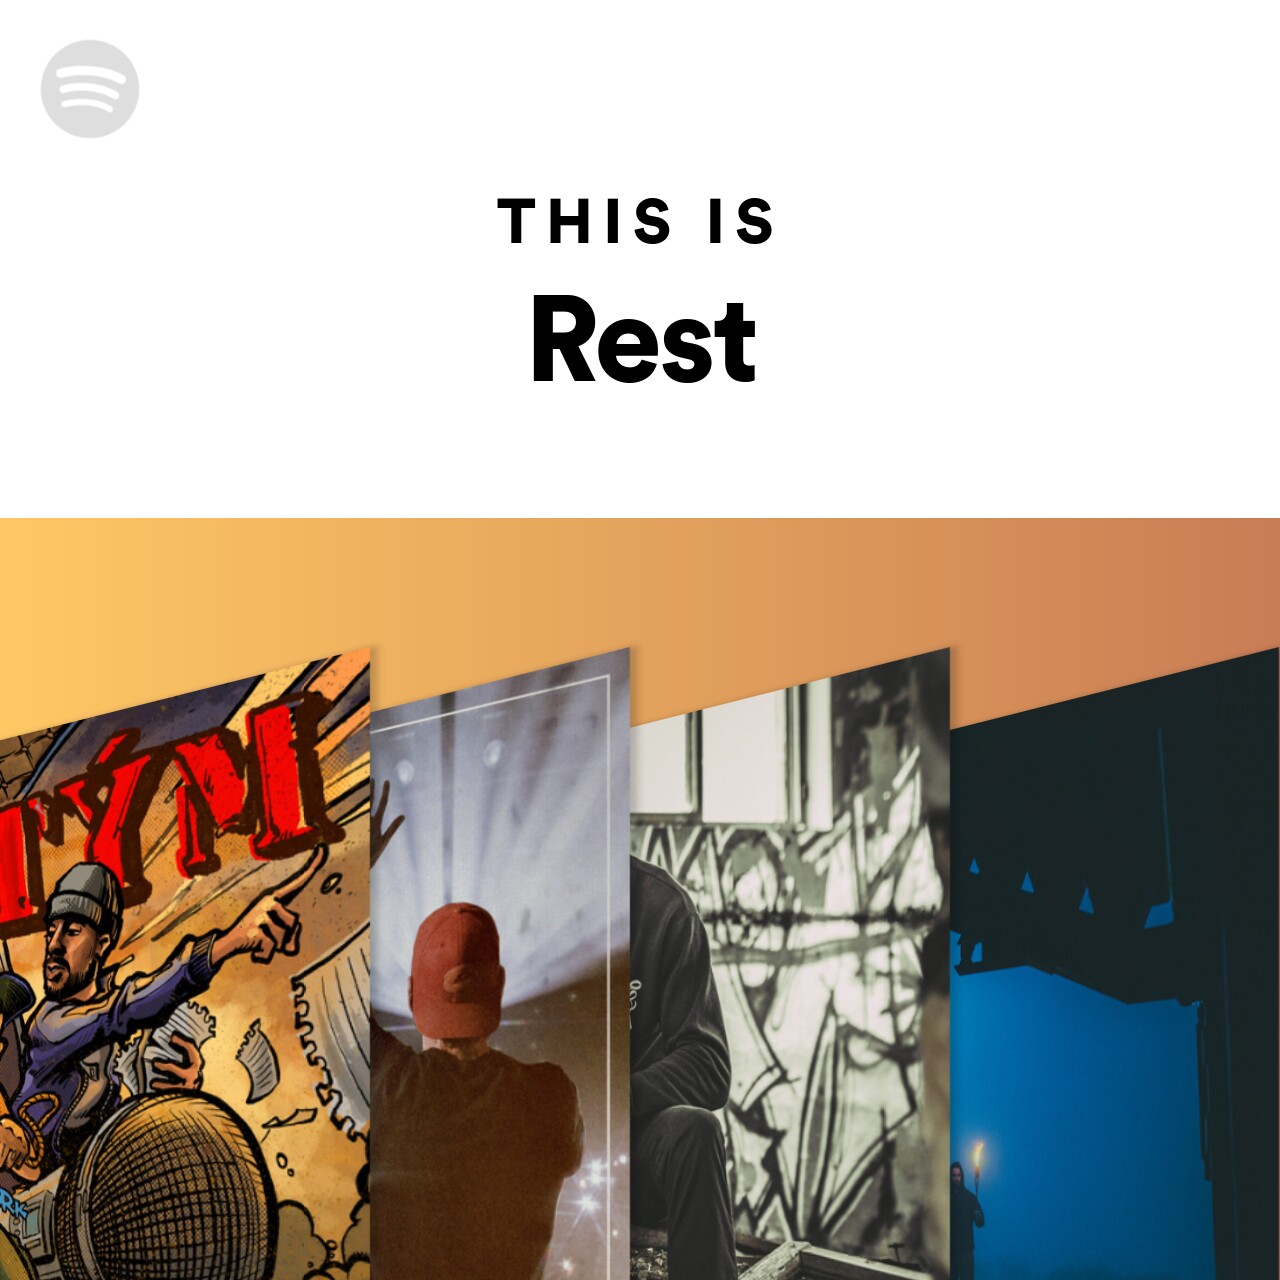 This Is Rest